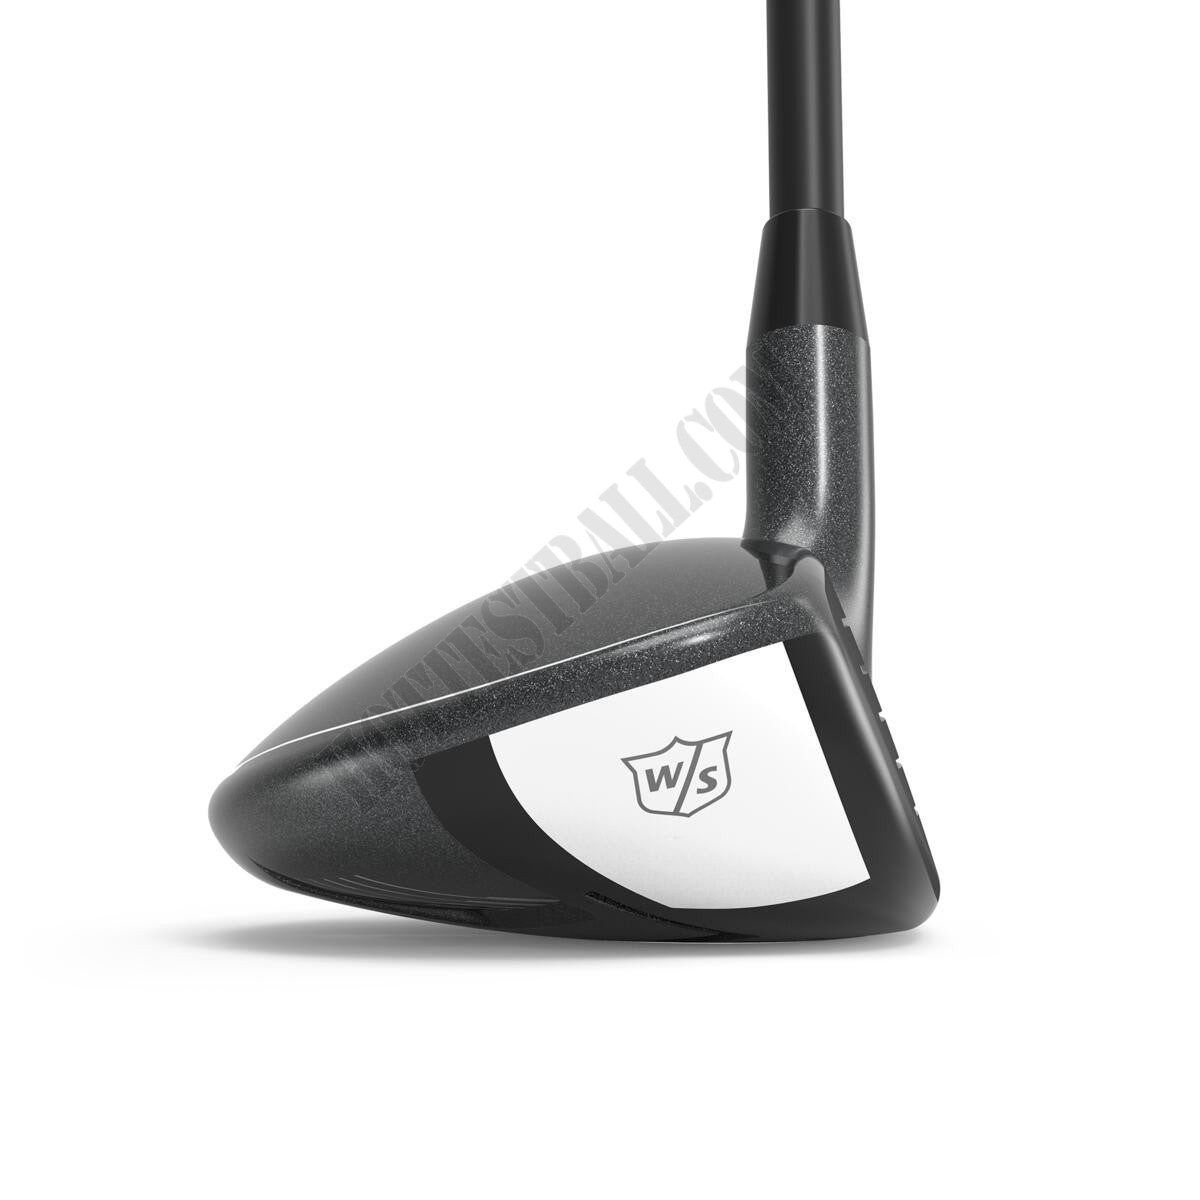 Launch Pad FY Club Hybrids - Wilson Discount Store - -5